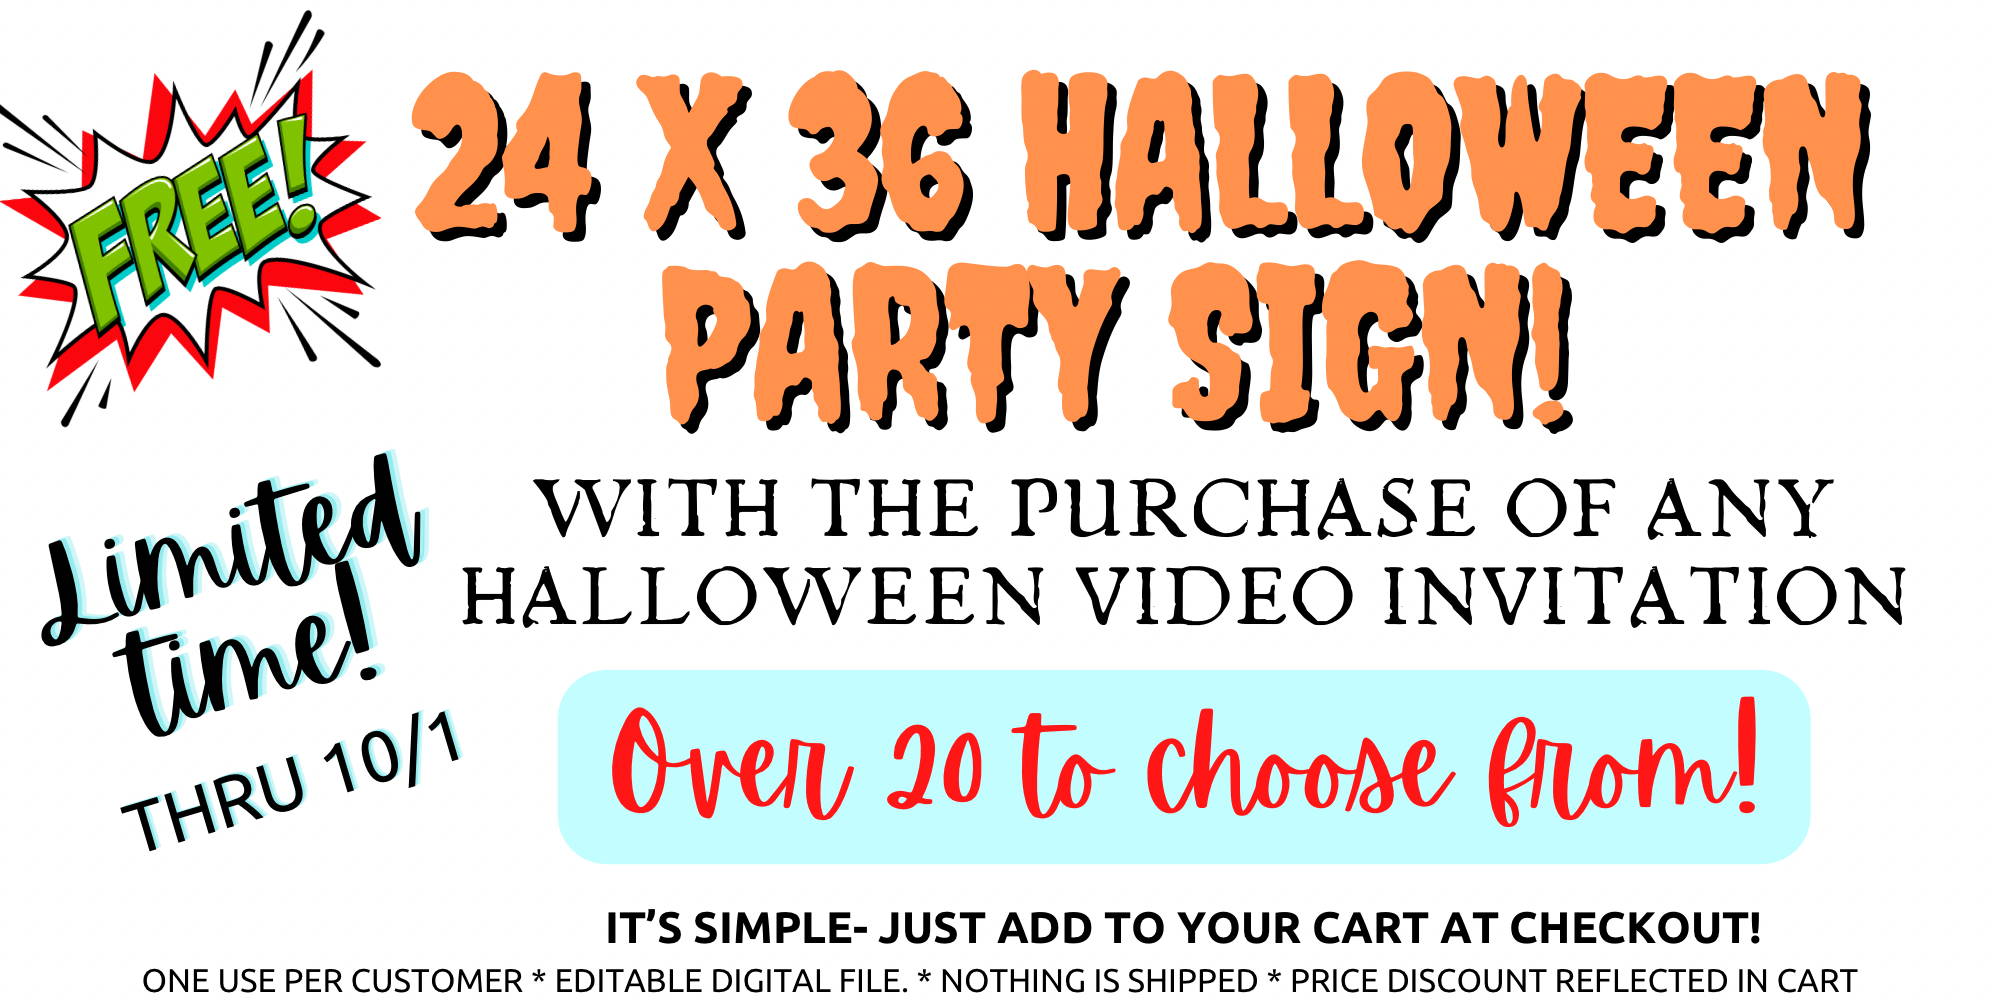 The Best Halloween Video Invitation and  Party Ideas for your Halloween party! Shop the largest Halloween video invitation selection anywhere from Hostessy! Your guests into will freak for your Spooktacular Halloween Party with a Hostessy Video invitation. Hostessy editable Halloween invitation templates are easy, fun, and affordable. Easily edit and send your Halloween invitation by text, email, social media or even print. Edit your amazing invitation template in seconds  share with friends and family, sit back and collect compliments! The best selection of Halloween invitations for Halloween Parties, Trick or Treating, Cocktail Parties, Costume Party, P